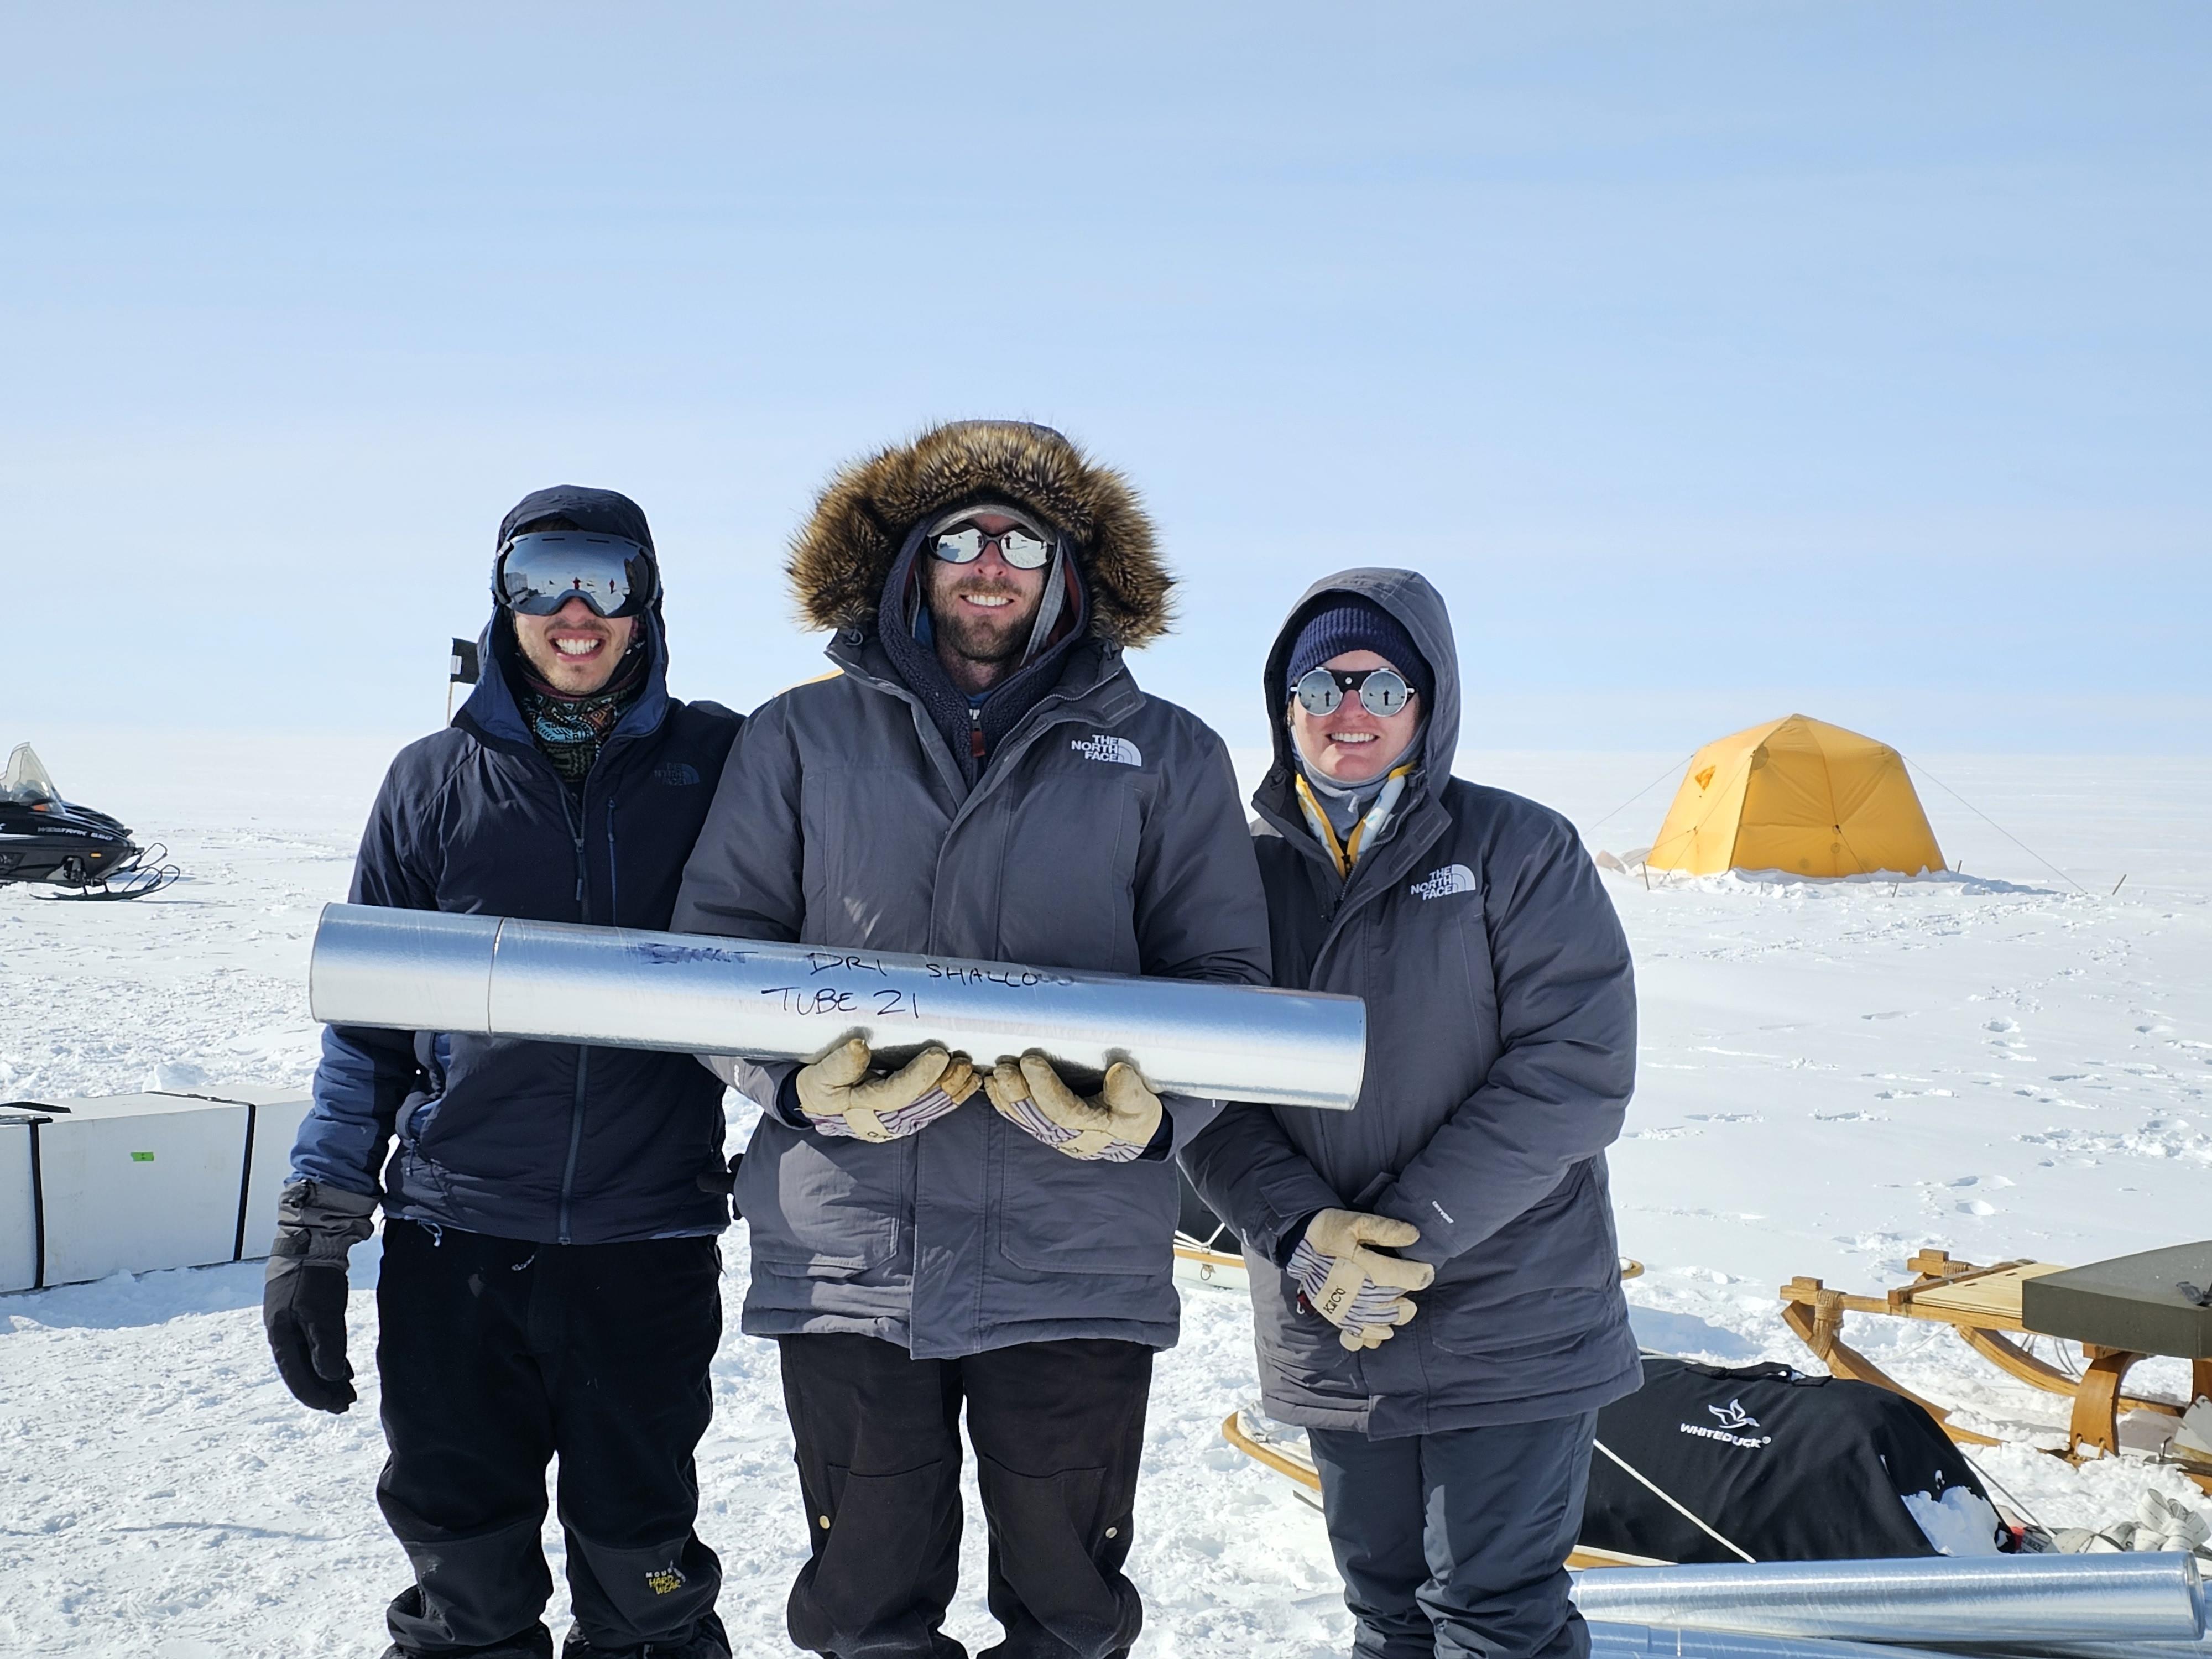 Left to right, PhD student Benjamin Riddell-Young, Nathan Chellman, and Rachel Moore holding an ice core at a remote field site.